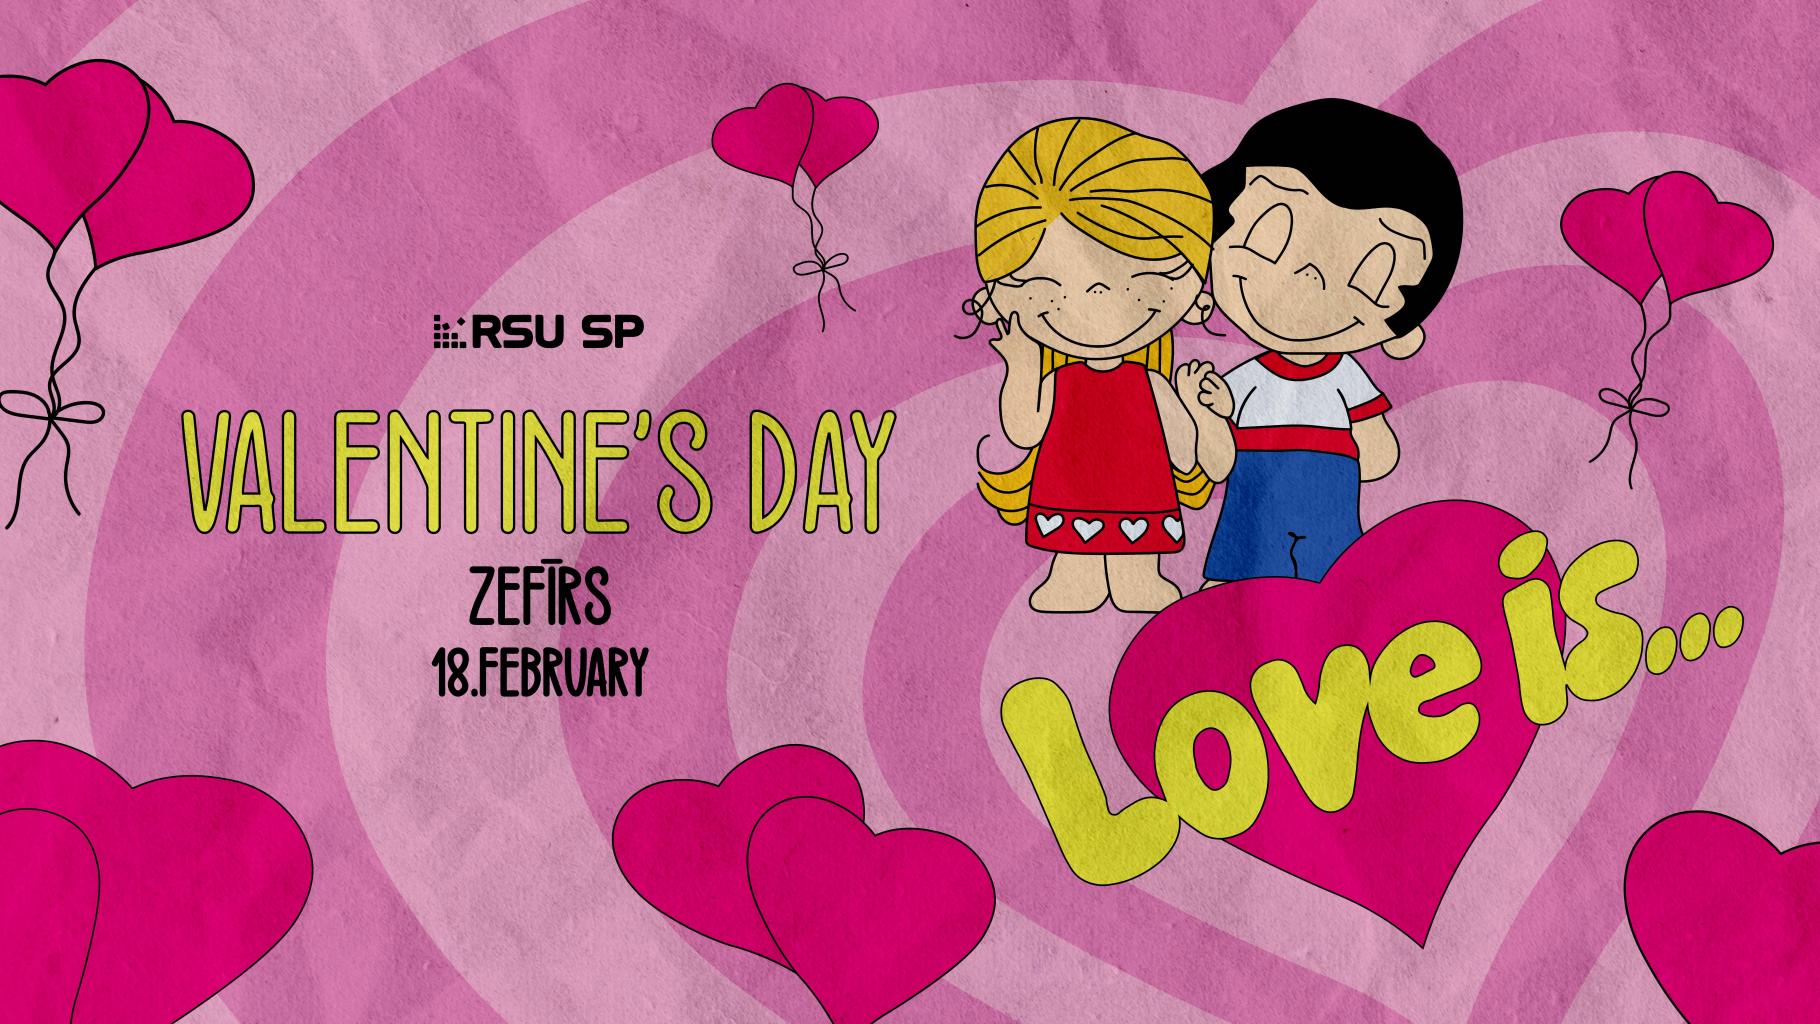 Student Union Organises Valentine's Day Party